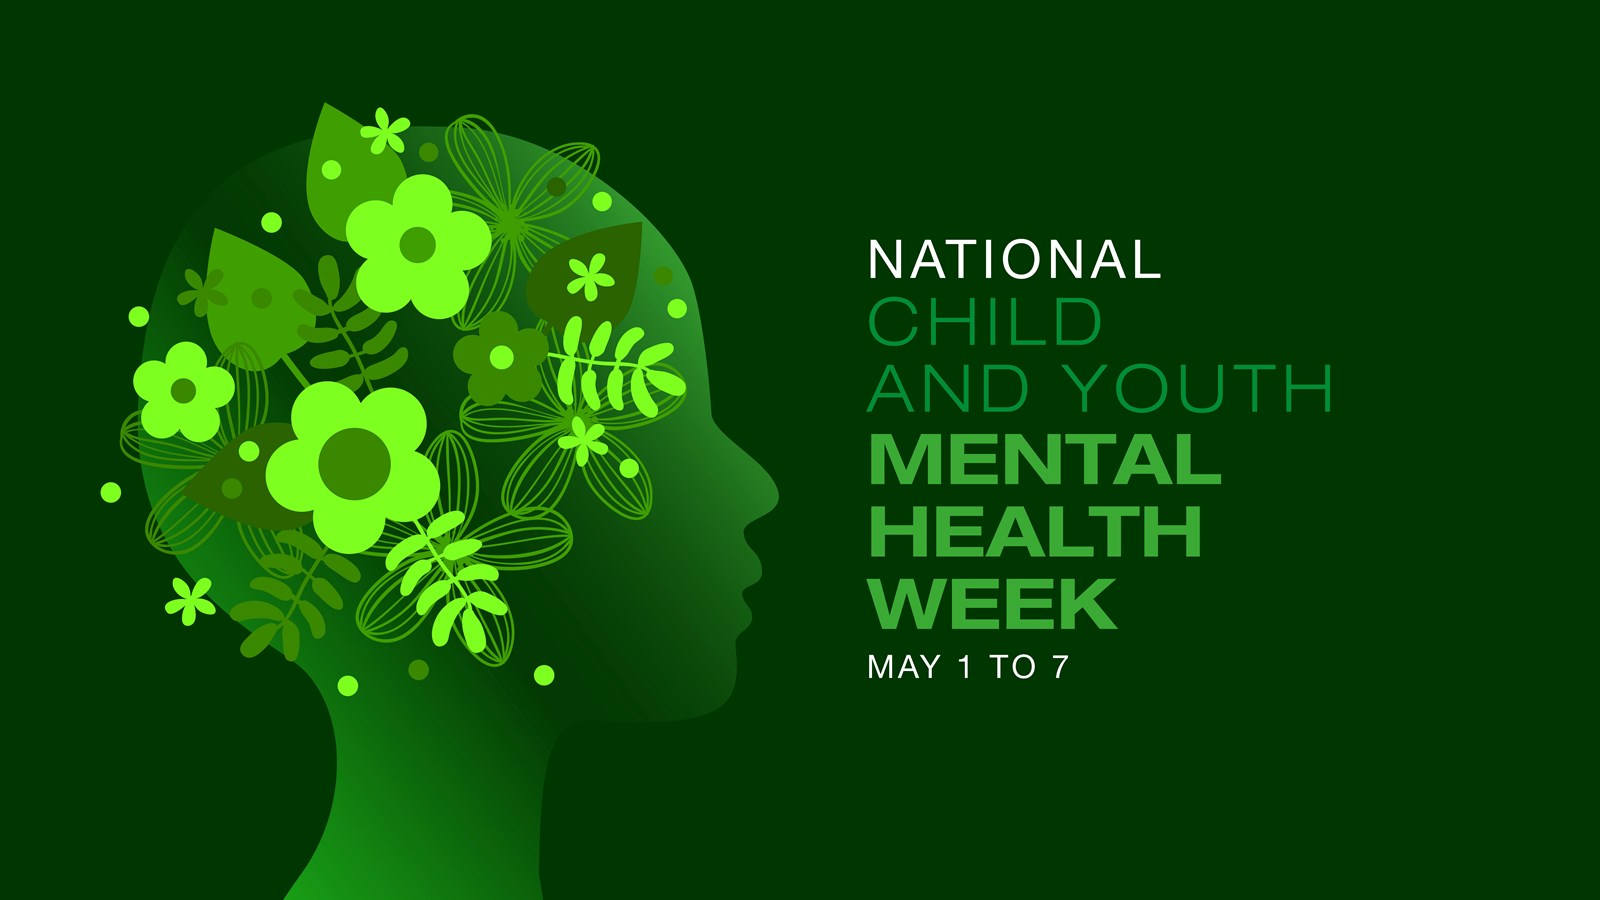 National Child and Youth Mental Health Week May 1 to 7